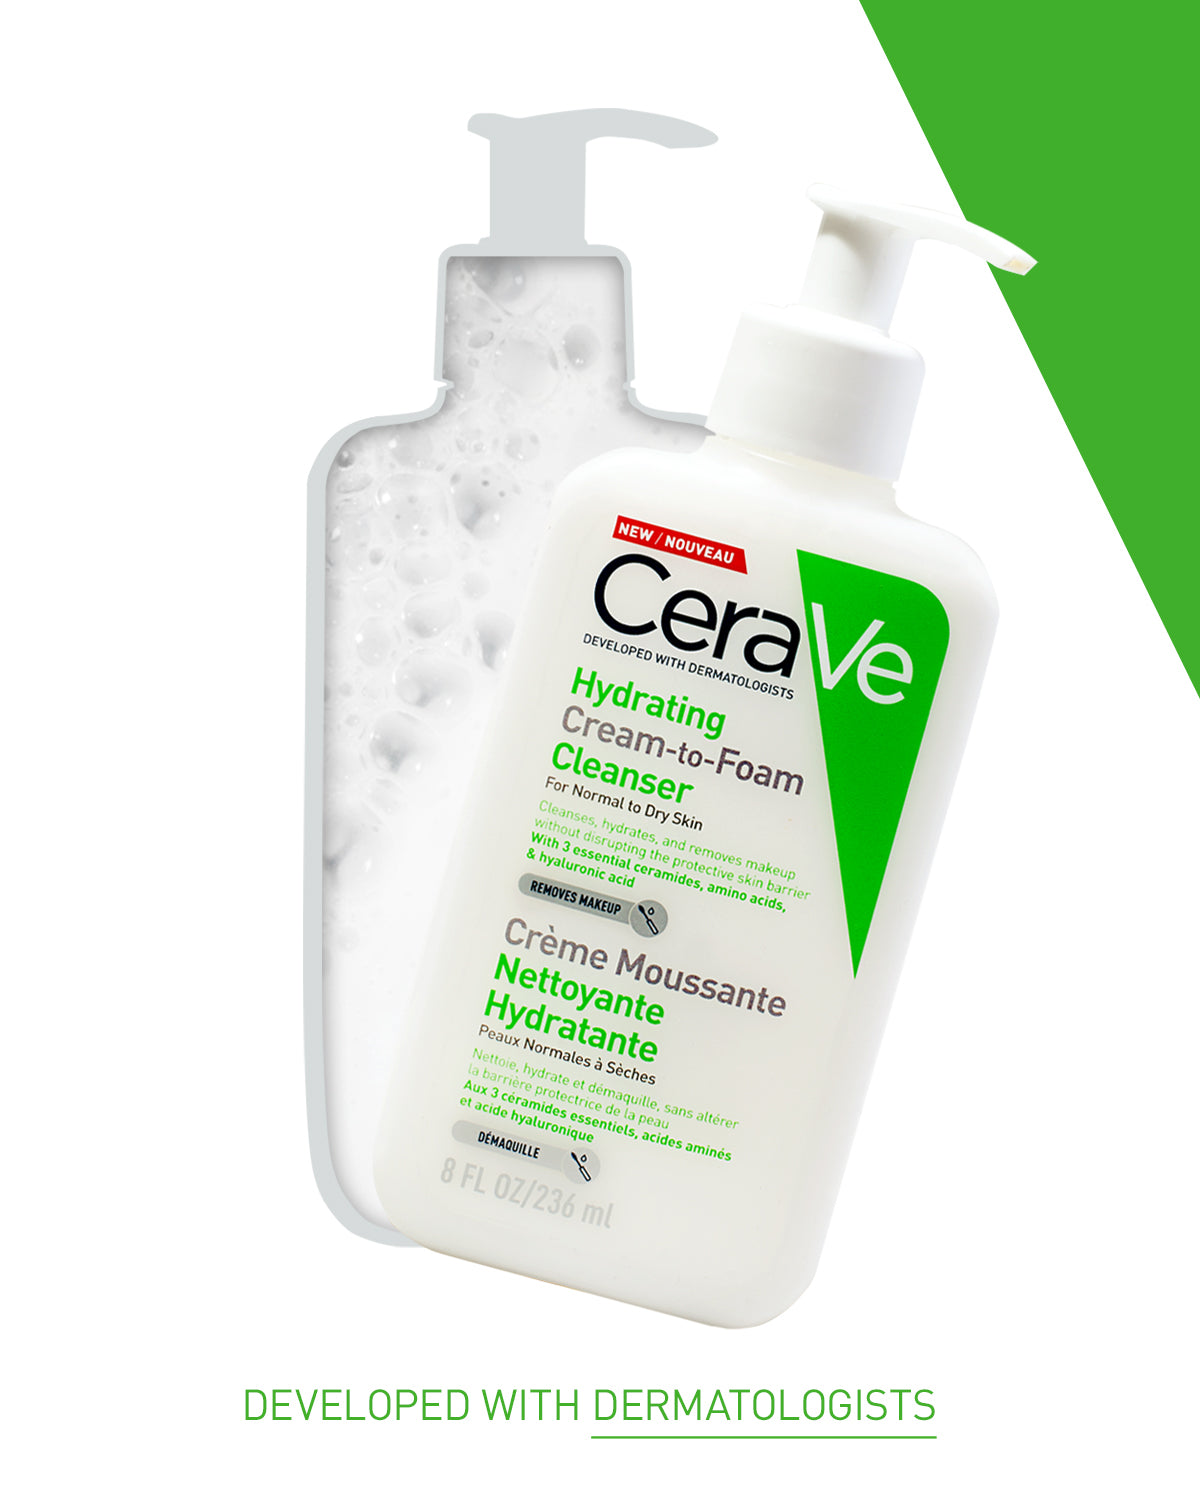 CeraVe hydrating cream to foam cleanser, Dry skin, Leahys pharmacy